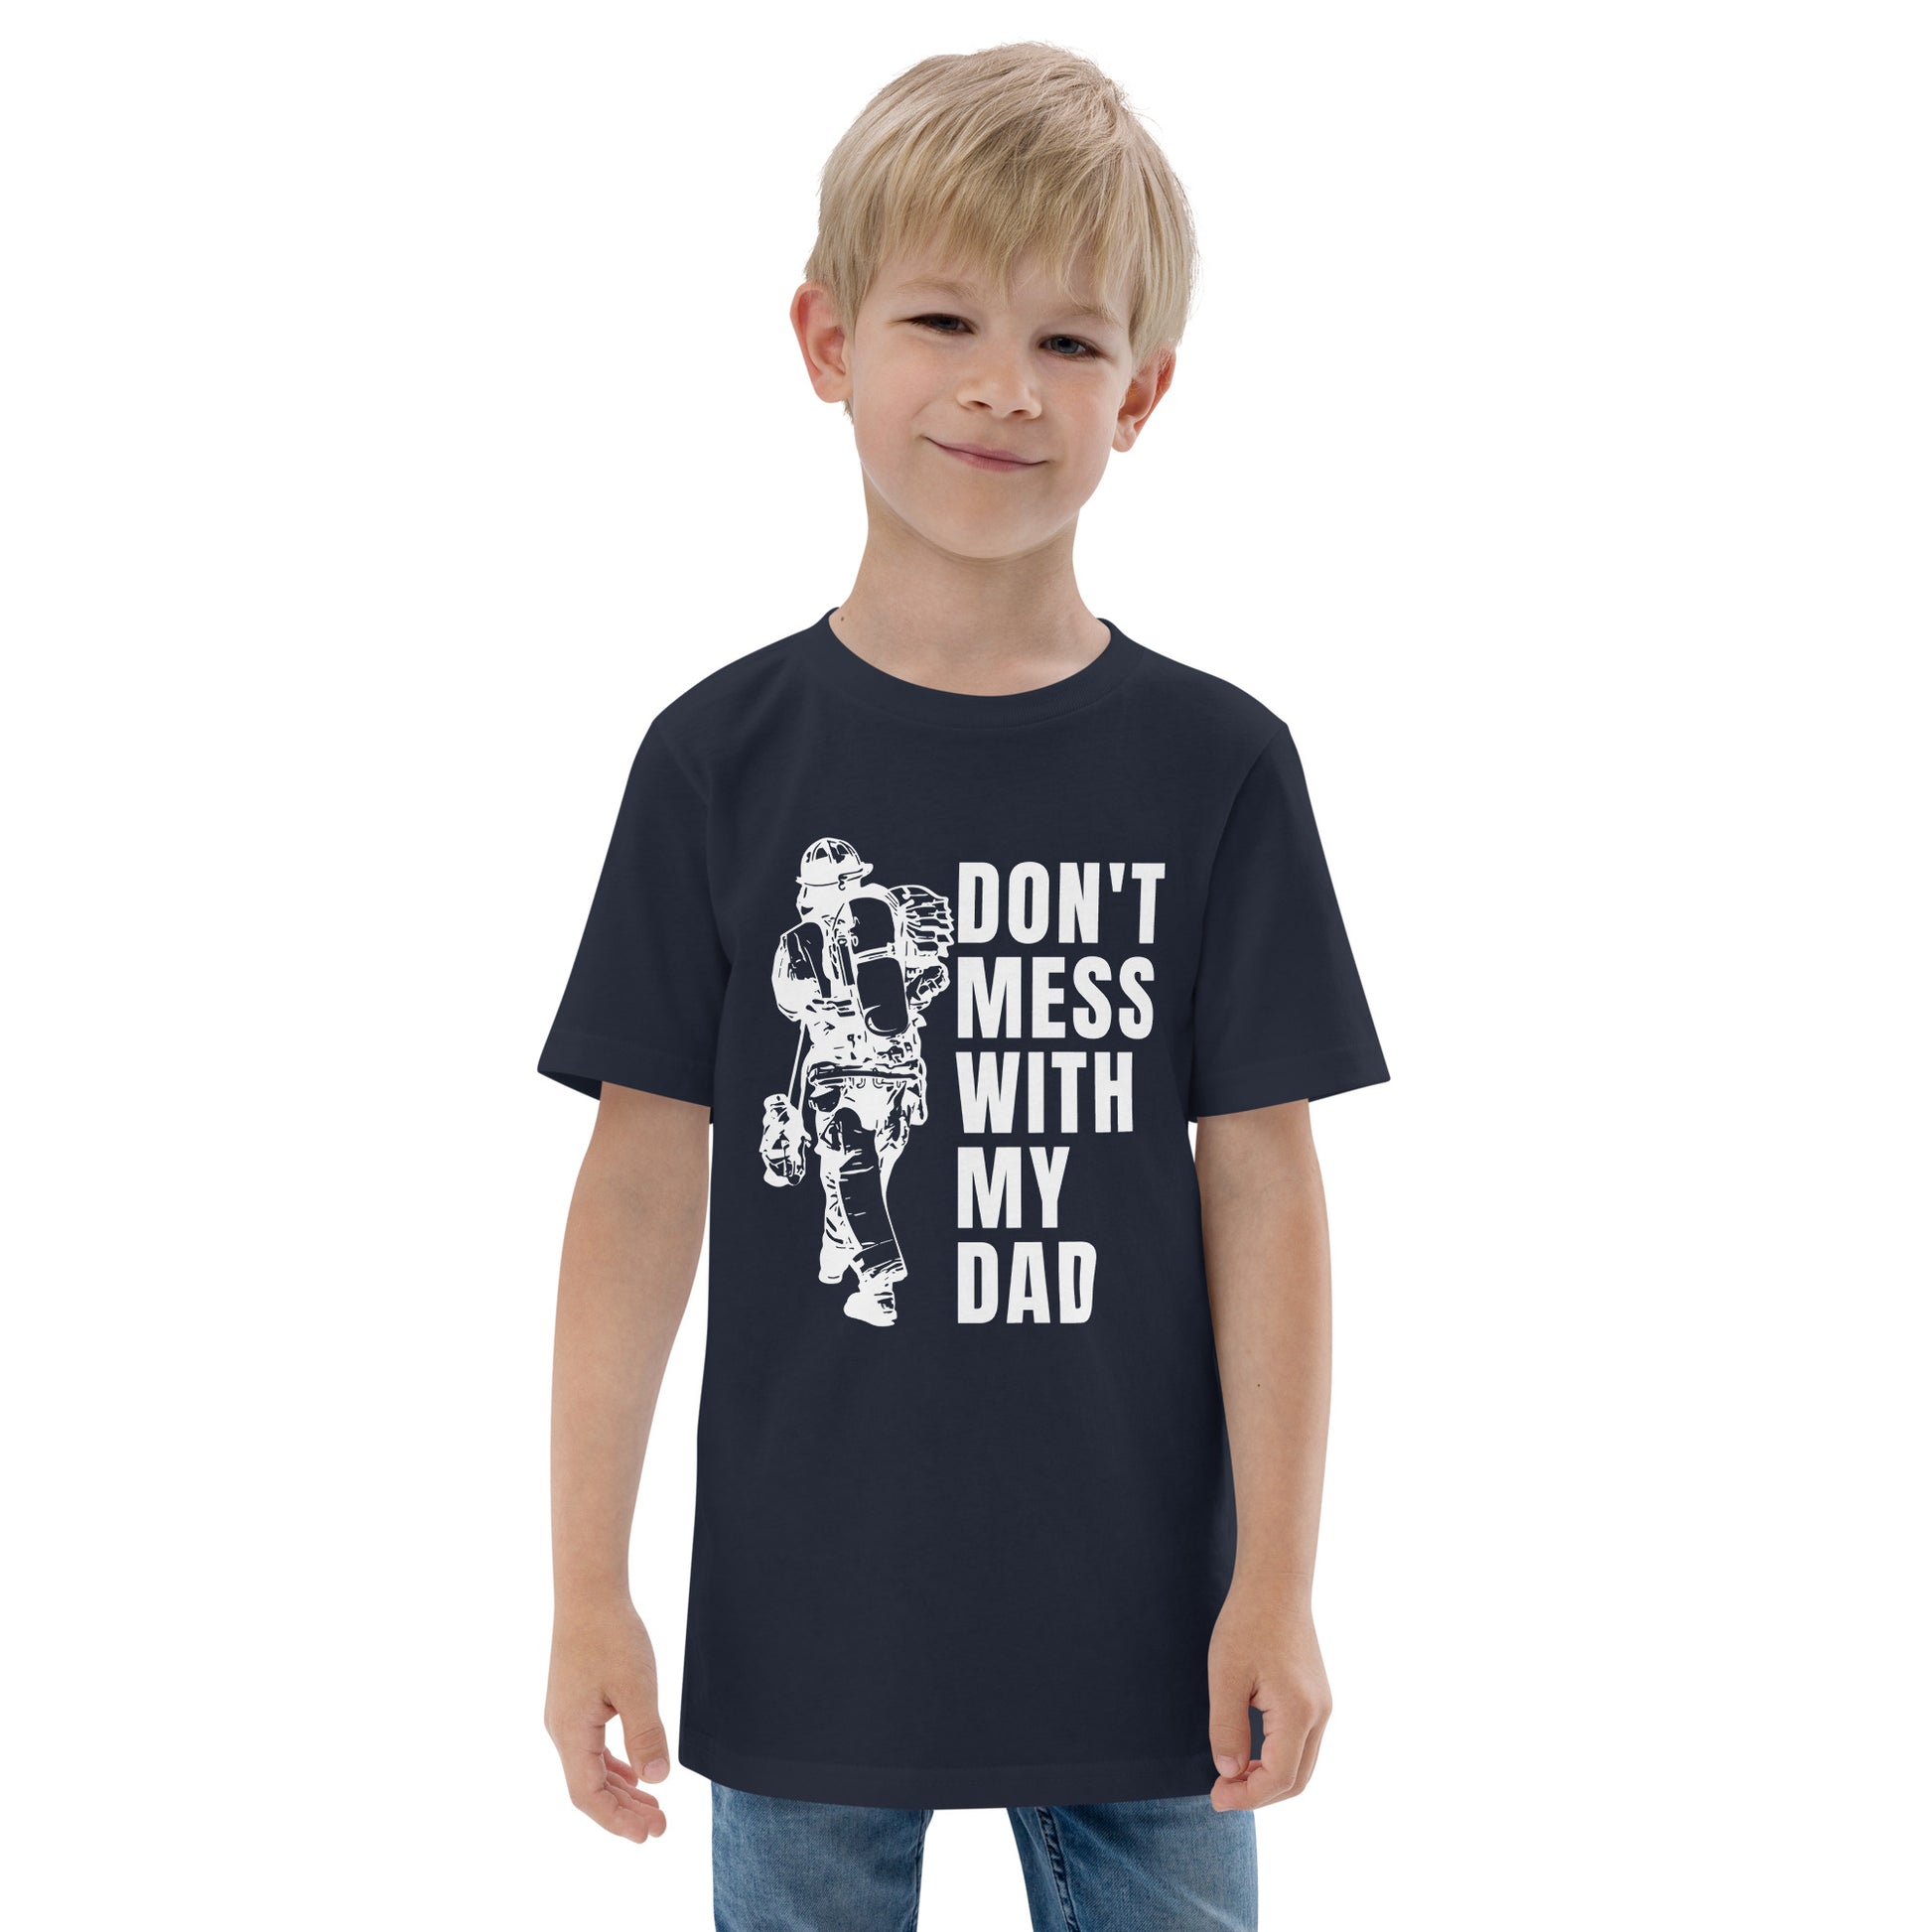 Kids Don't Mess with my Dad, Firefighter shirt. Navy Blue youth shirt.